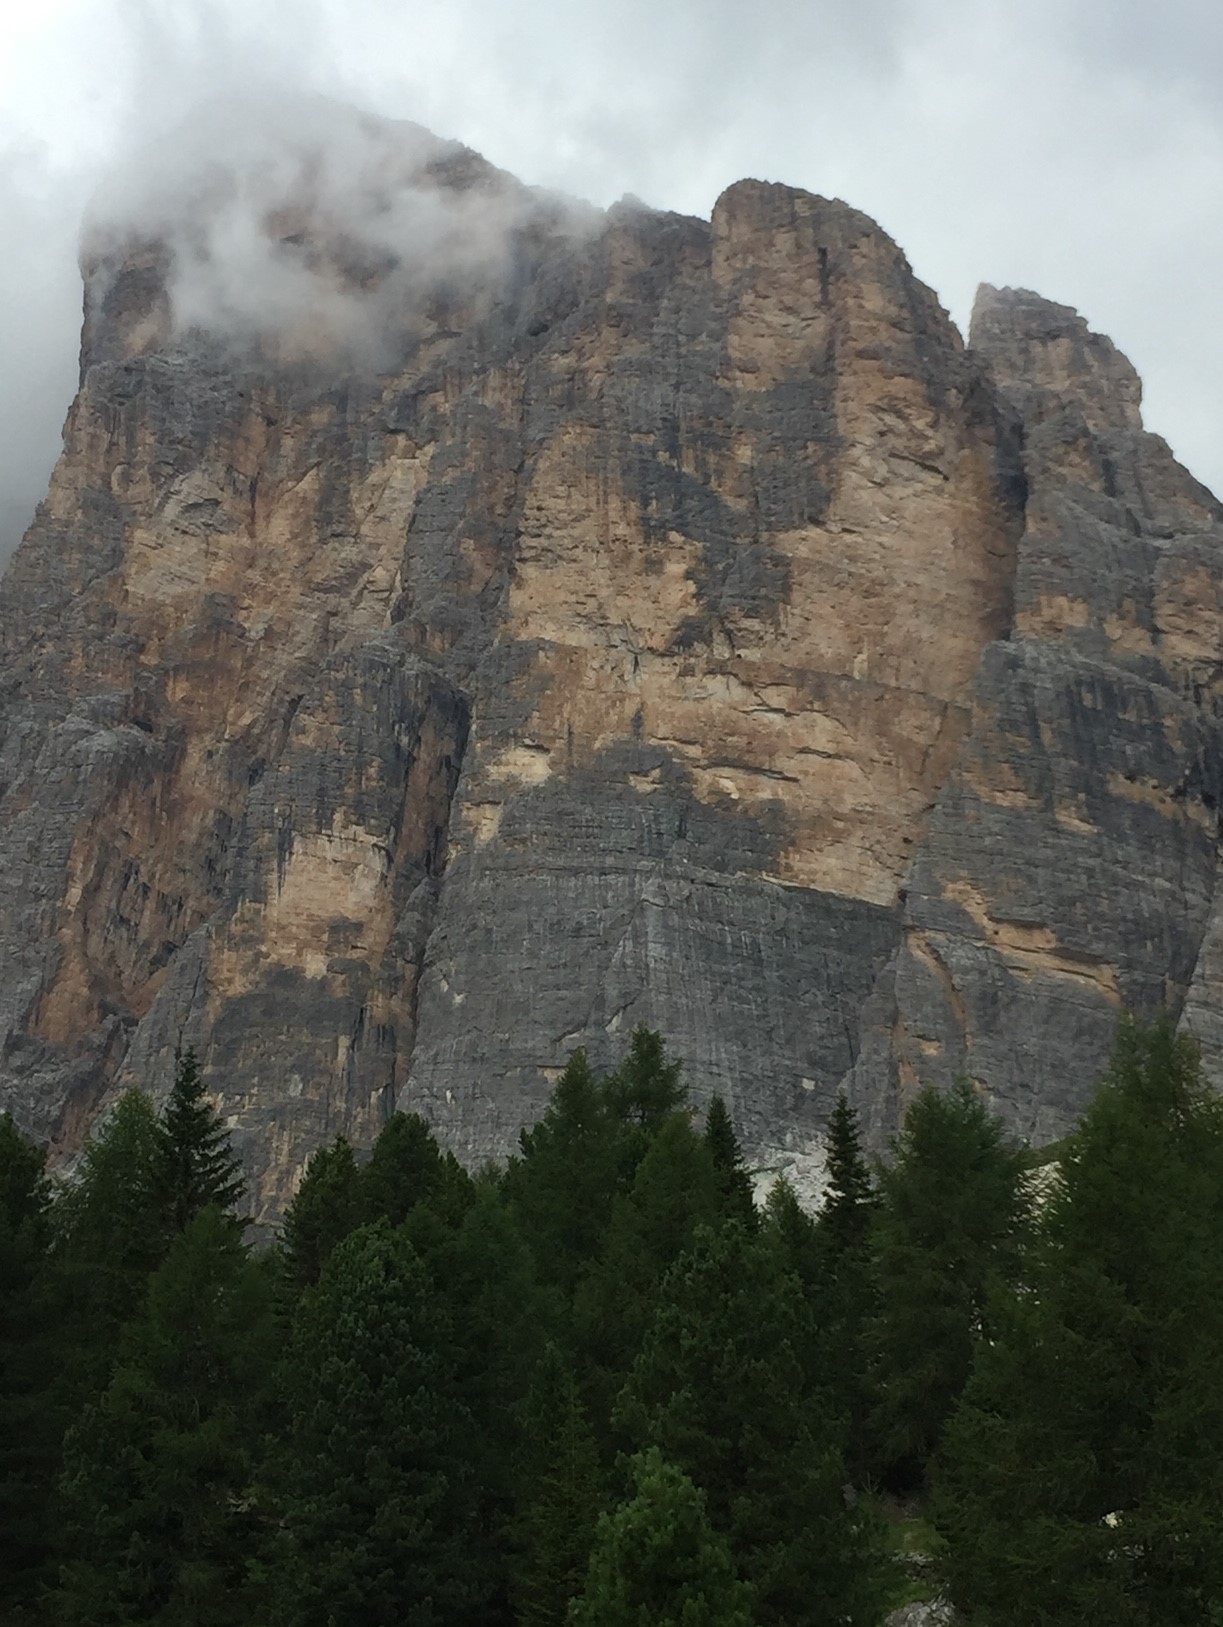 17 pitches and 2,200-foot arete in the Dolomites